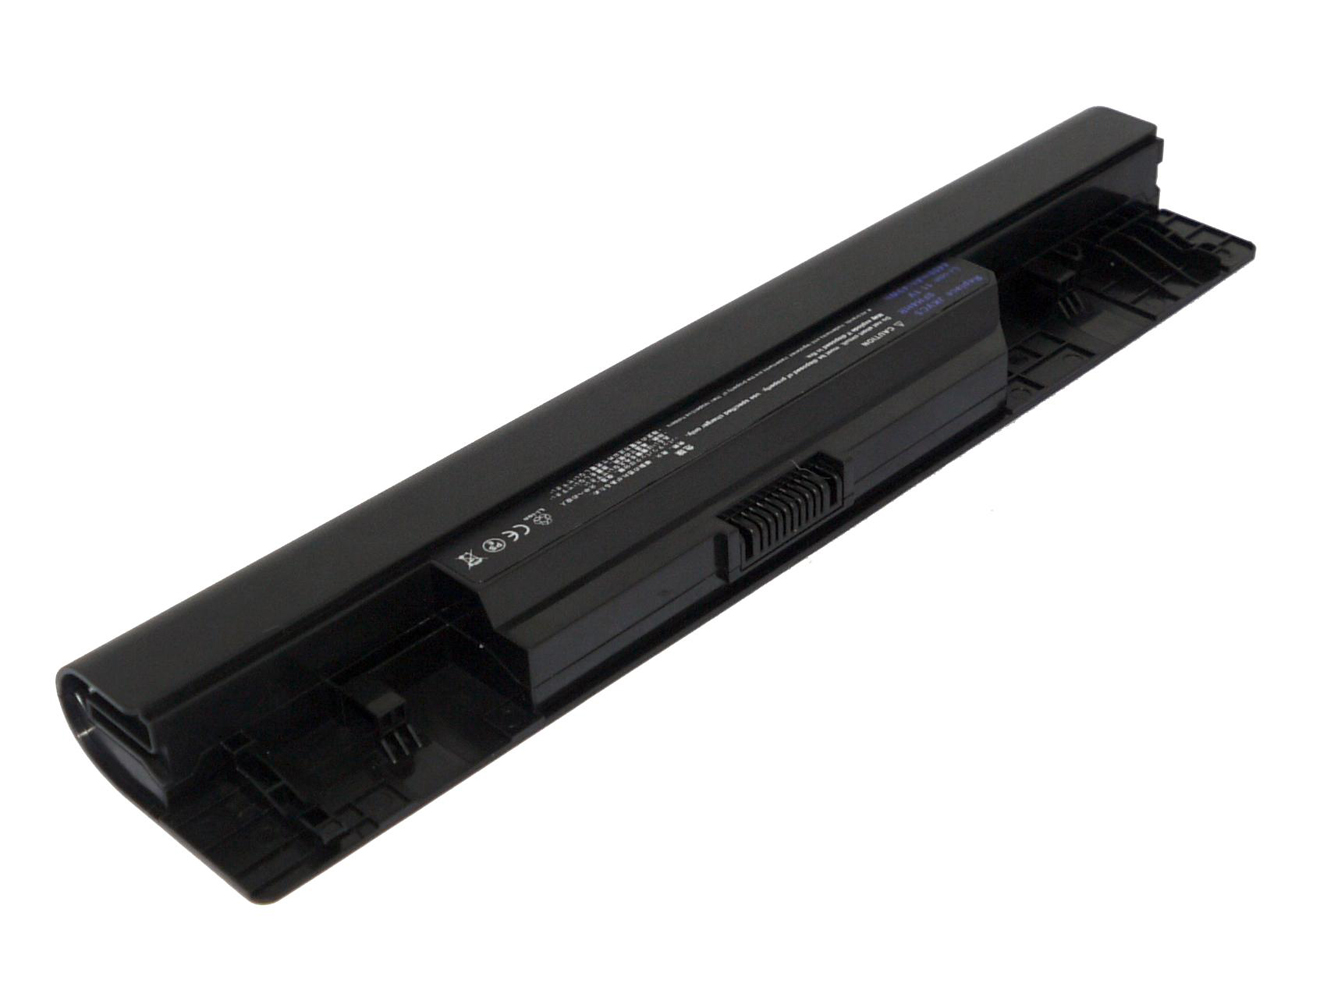 05Y4YV, 0FH4HR replacement Laptop Battery for Dell Inspiron 14, Inspiron 1464, 4400mAh, 11.10V